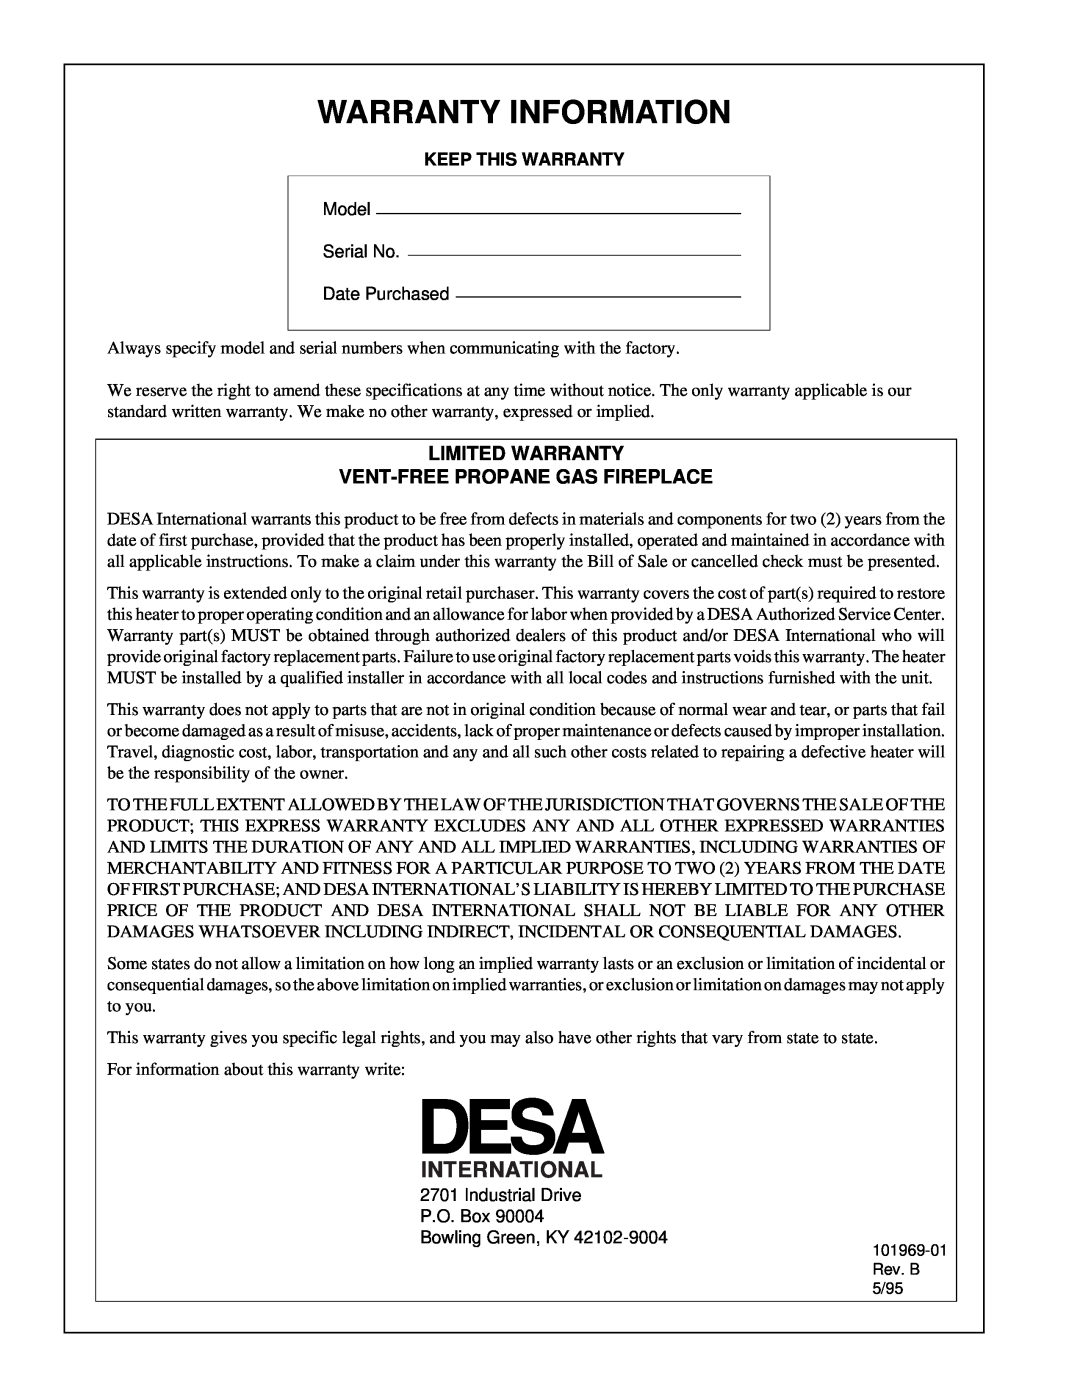 Desa UNVENTED (VENT-FREE) PROPANE GAS FIREPLACE installation manual Warranty Information, International, Keep This Warranty 